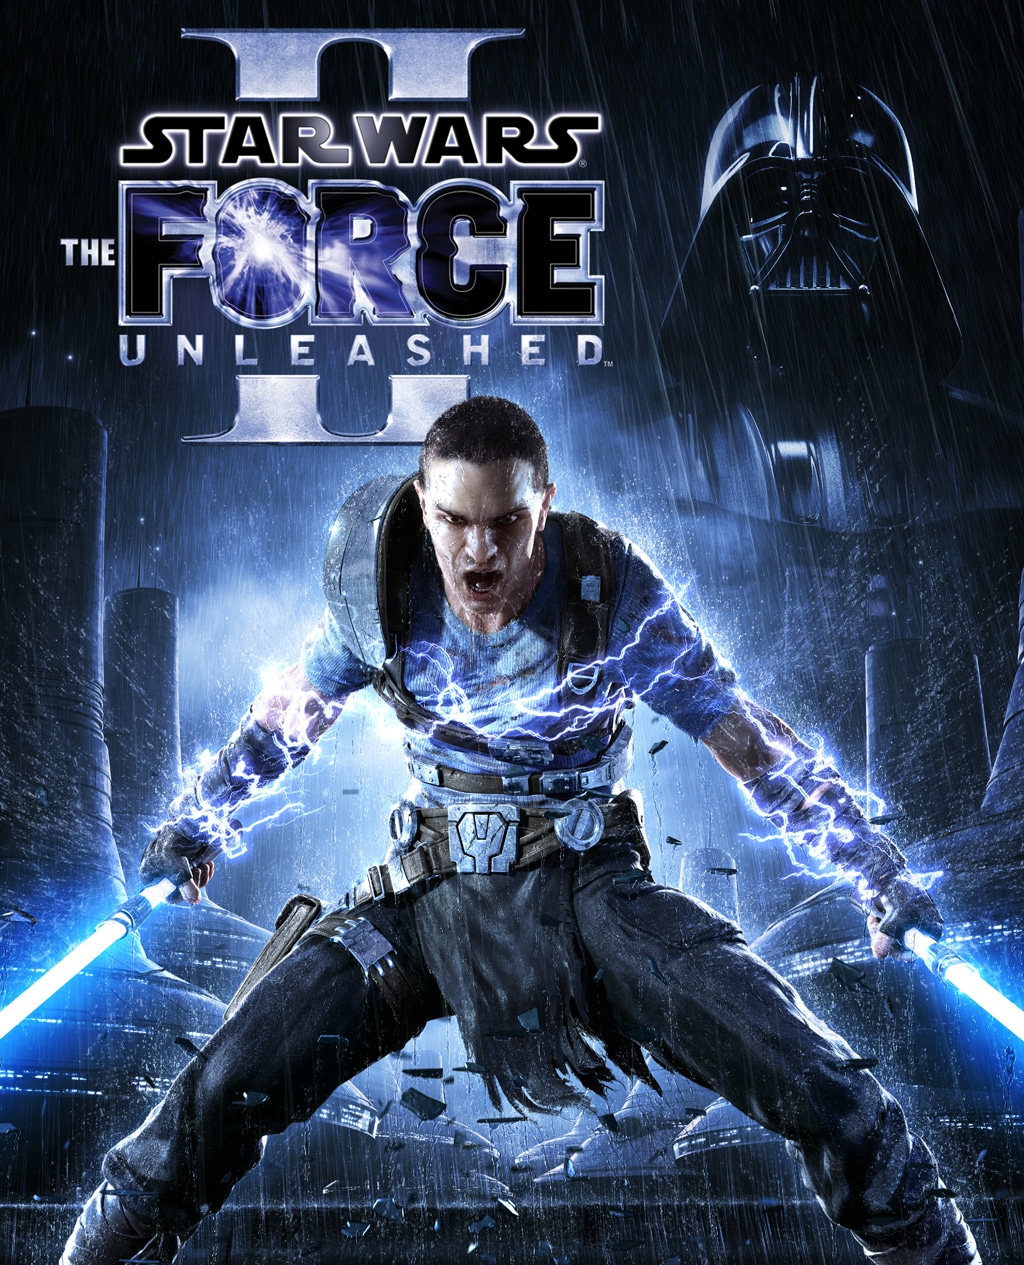 Star Wars The Force Unleashed 2 Walkthrough Video Guide (Xbox 360, PS3, PC, Video Games Blogger